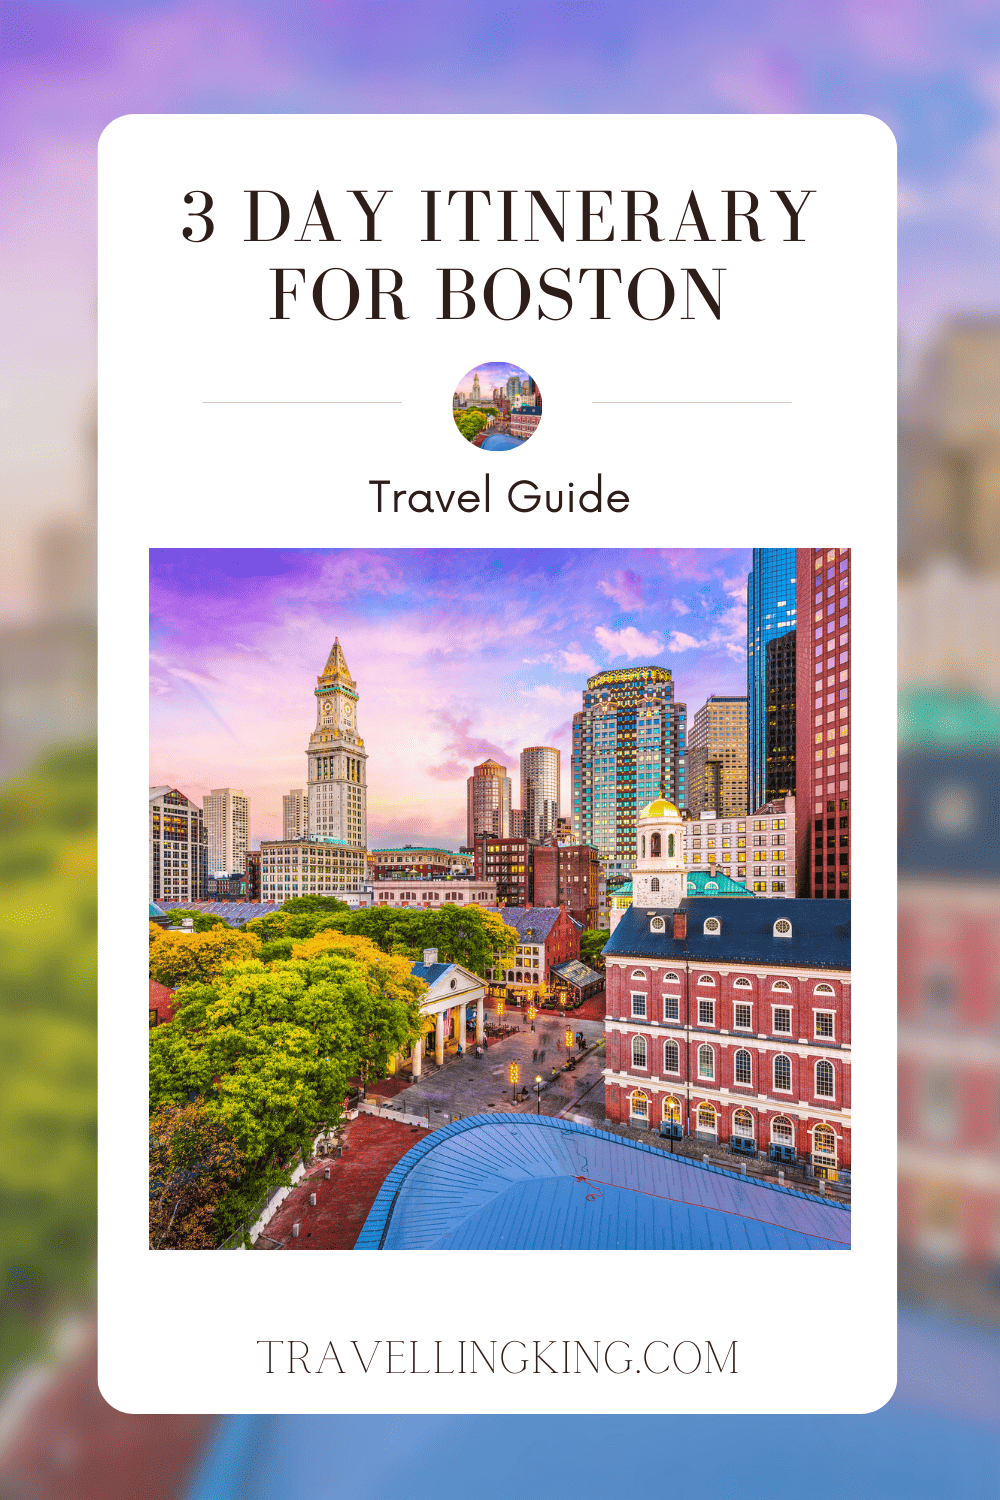 3 Day Itinerary for Boston